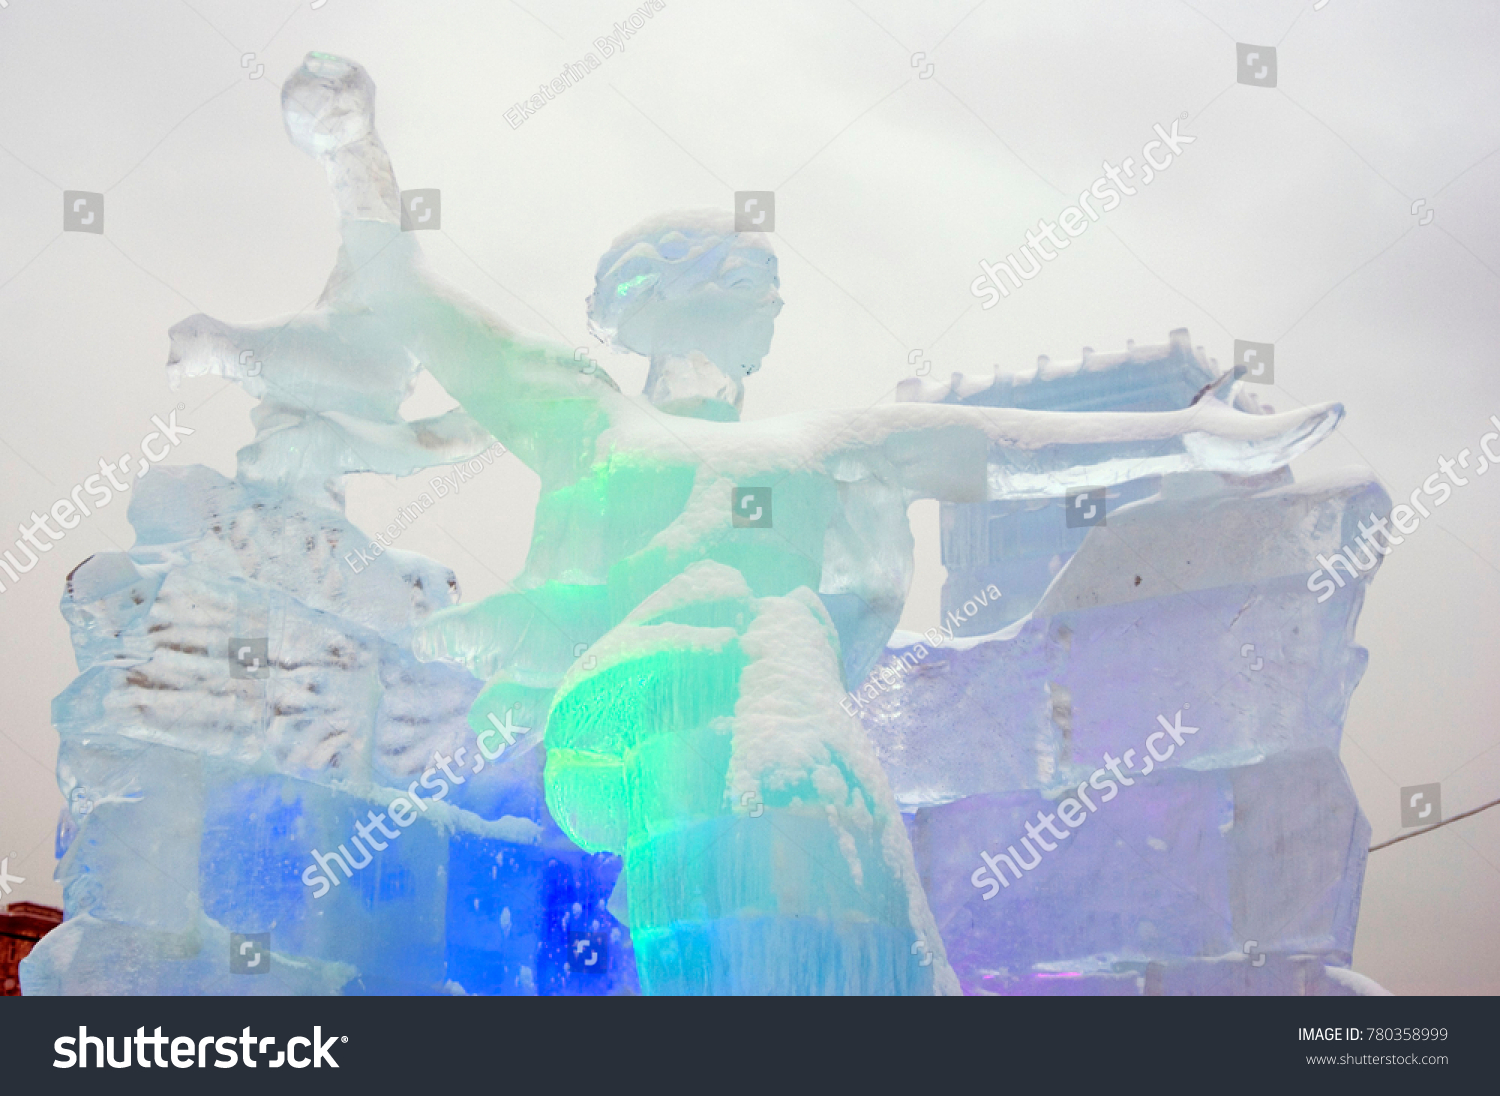 MOSCOW - JANUARY 05, 2017: Ice figures shown on Poklonnaya Hill in Moscow. Figures represent different landmarks of Russia. Christmas and New Year decoration. Color photo. #780358999